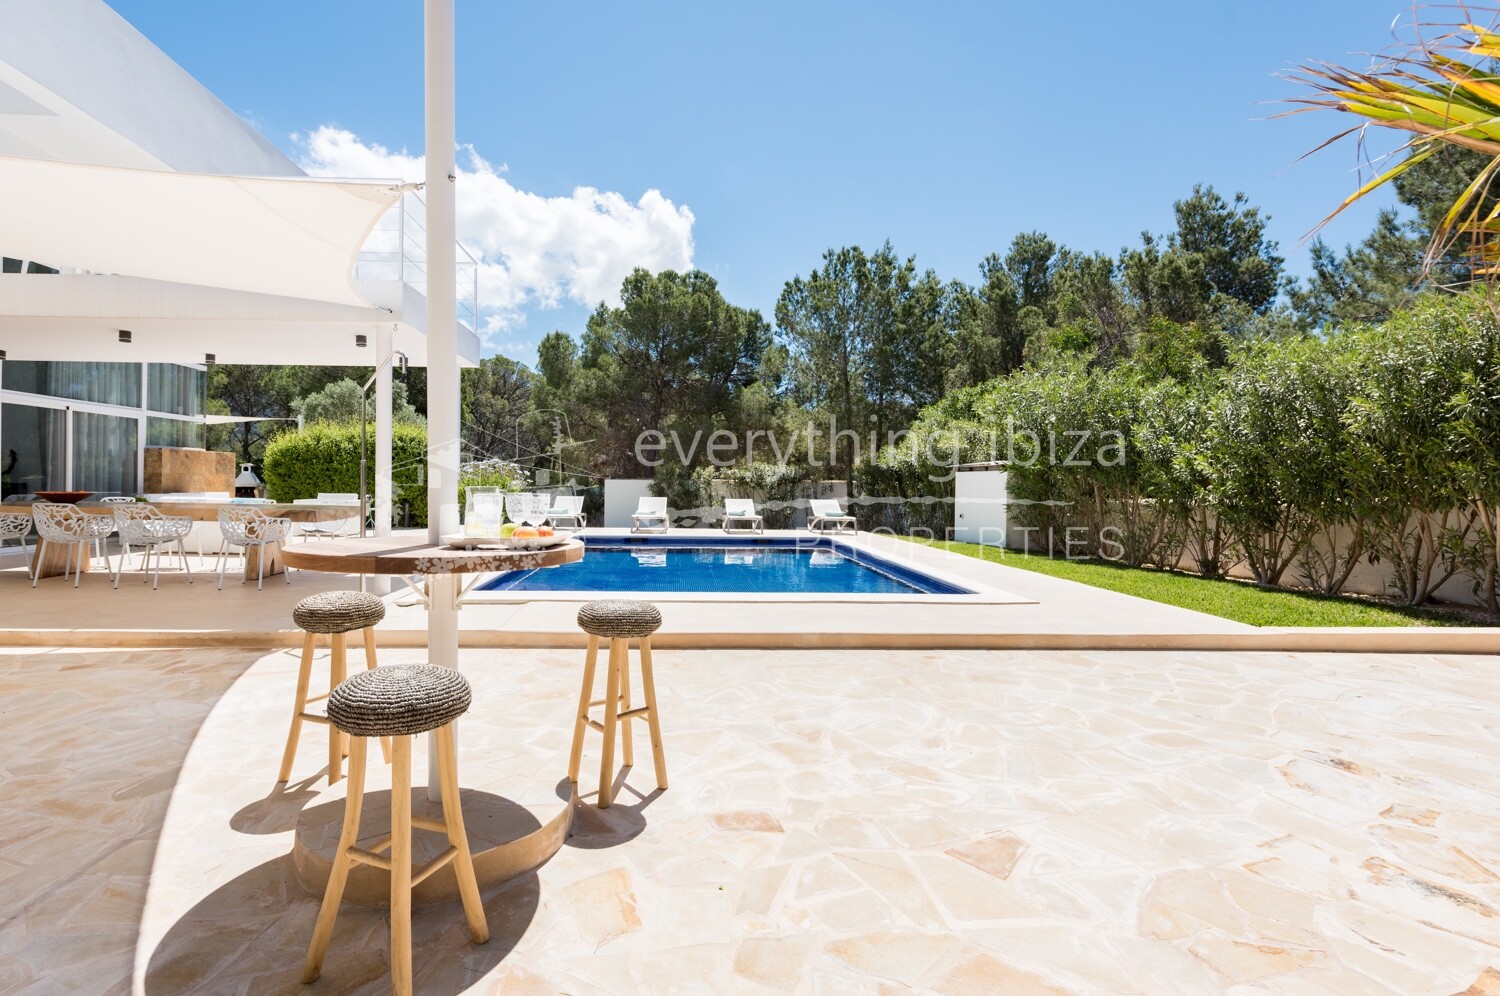 Cosmopolitan Modern Villa with Super Views & Tourist License, ref. 1512, for sale in Ibiza by everything ibiza Properties